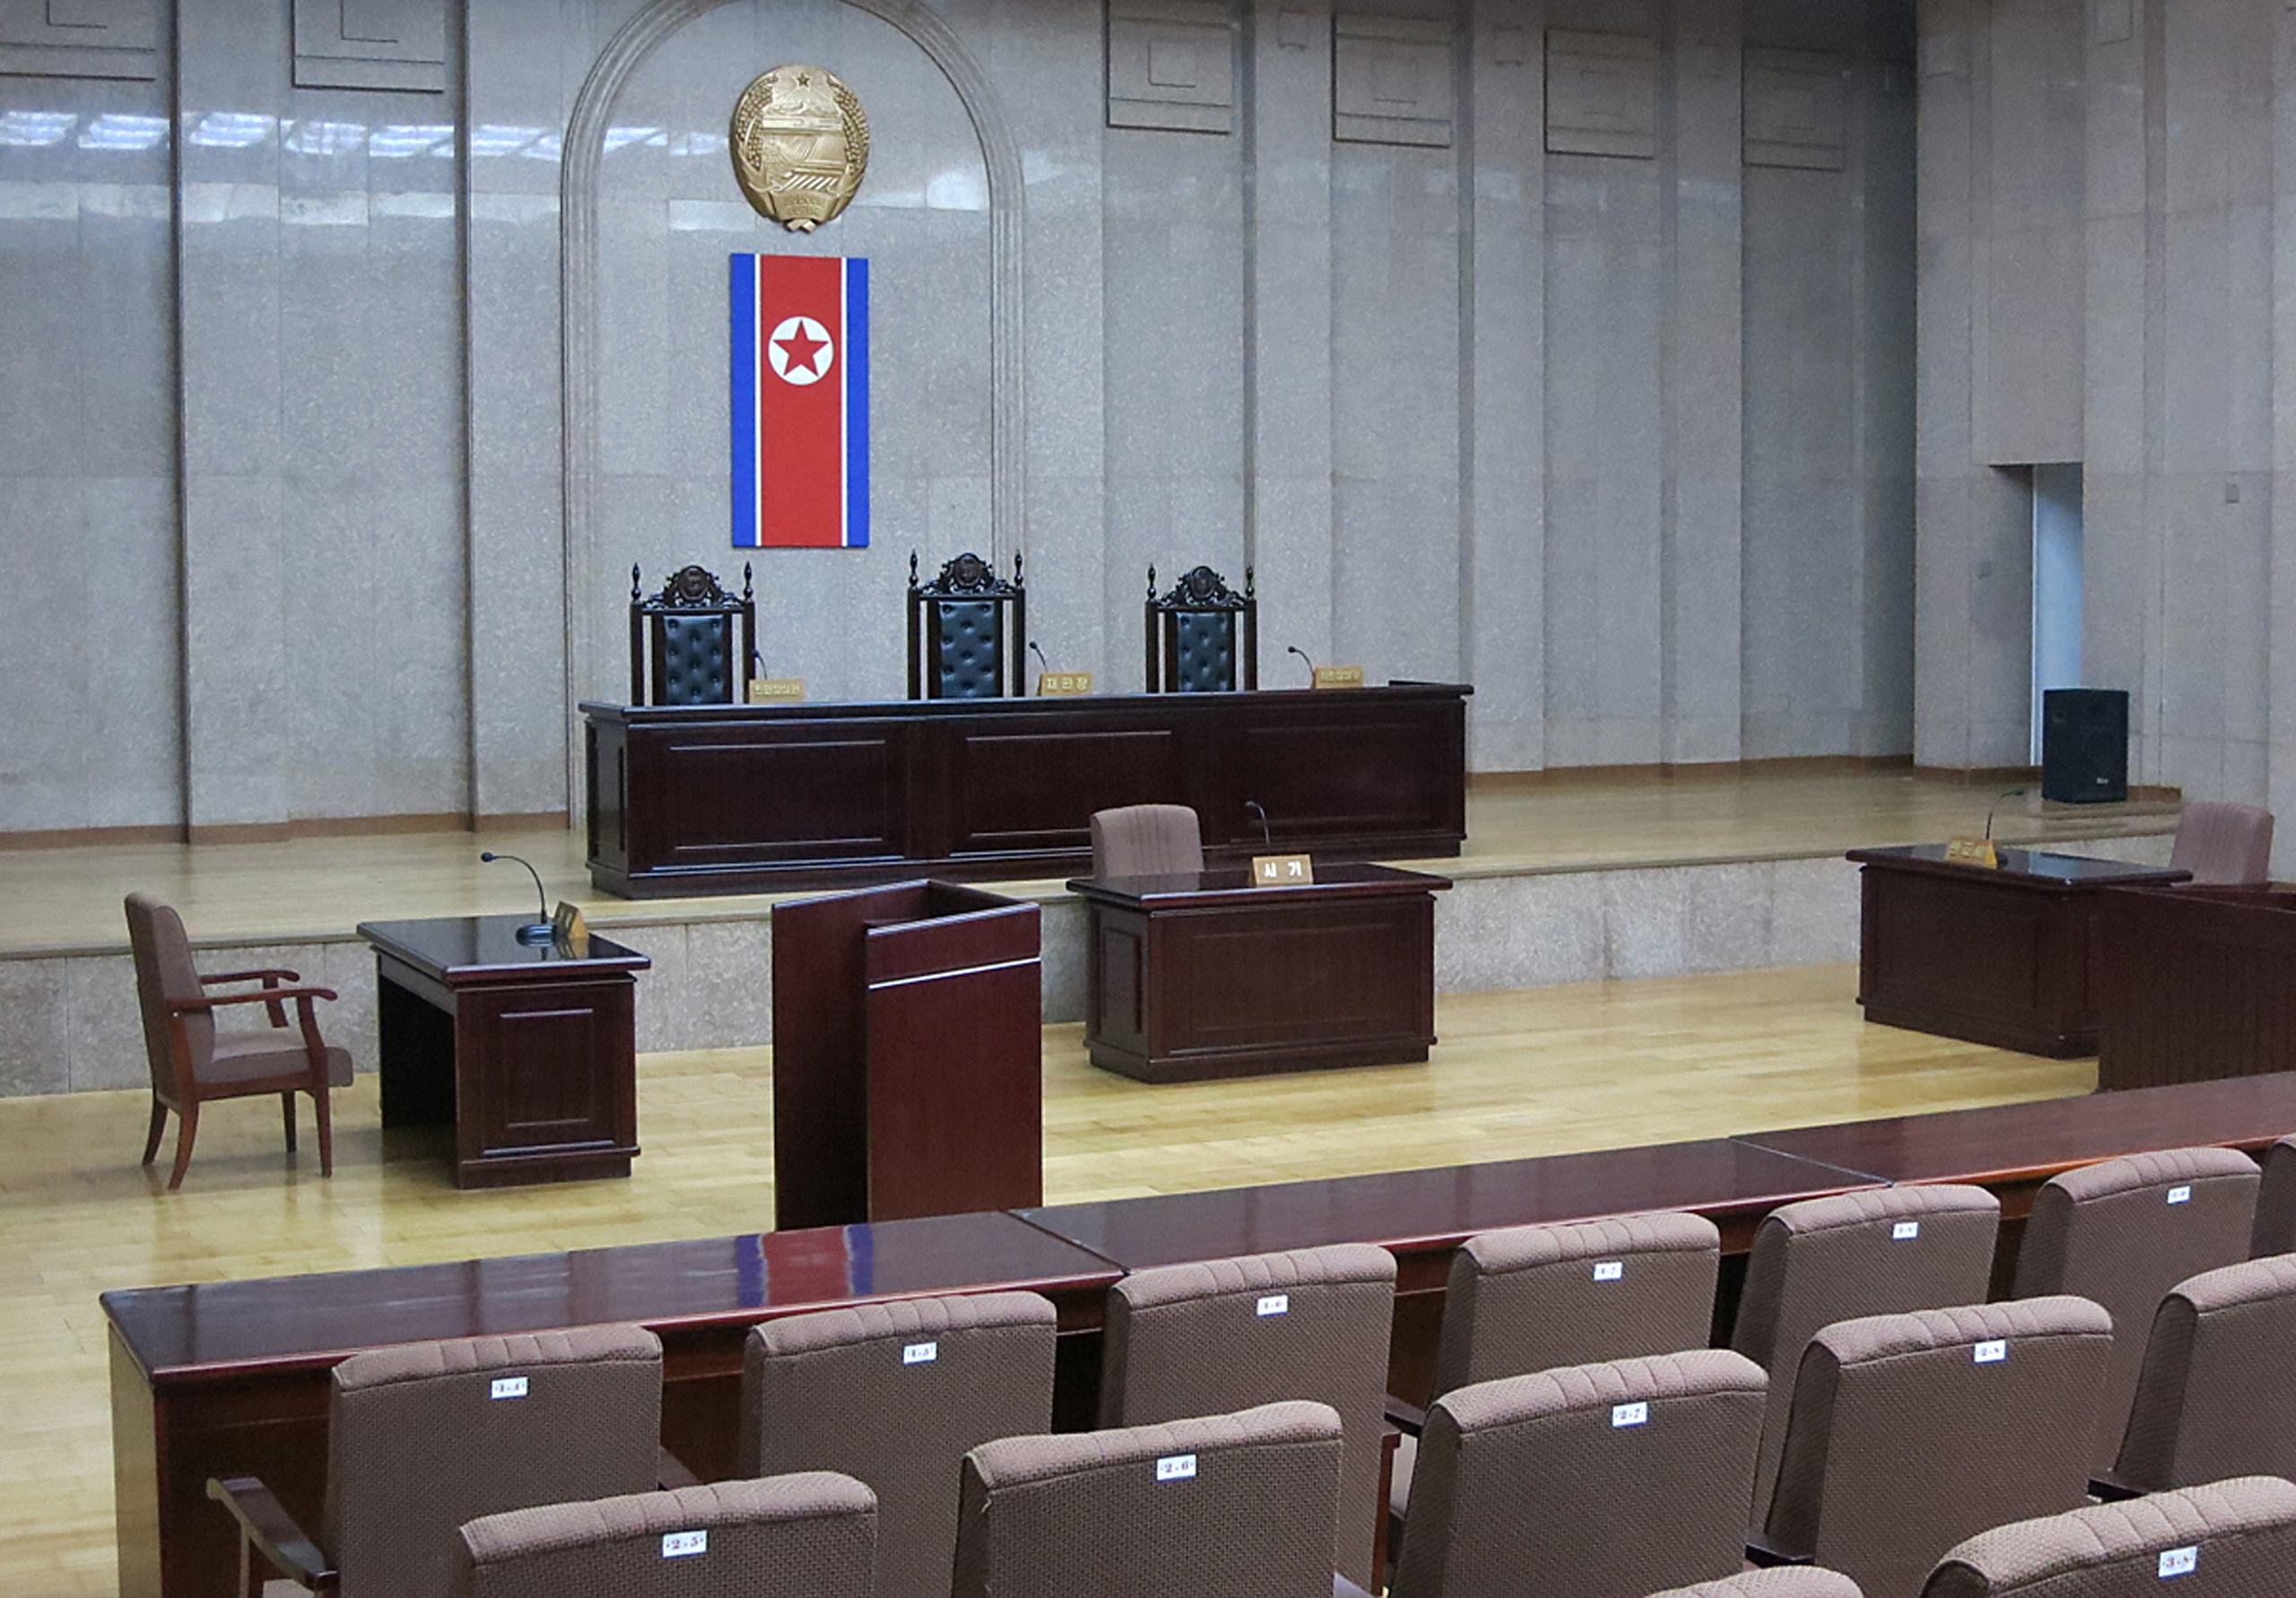 A North Korean flag hangs inside the interior of Pyongyang’s Supreme Court in March 2013. (AP)